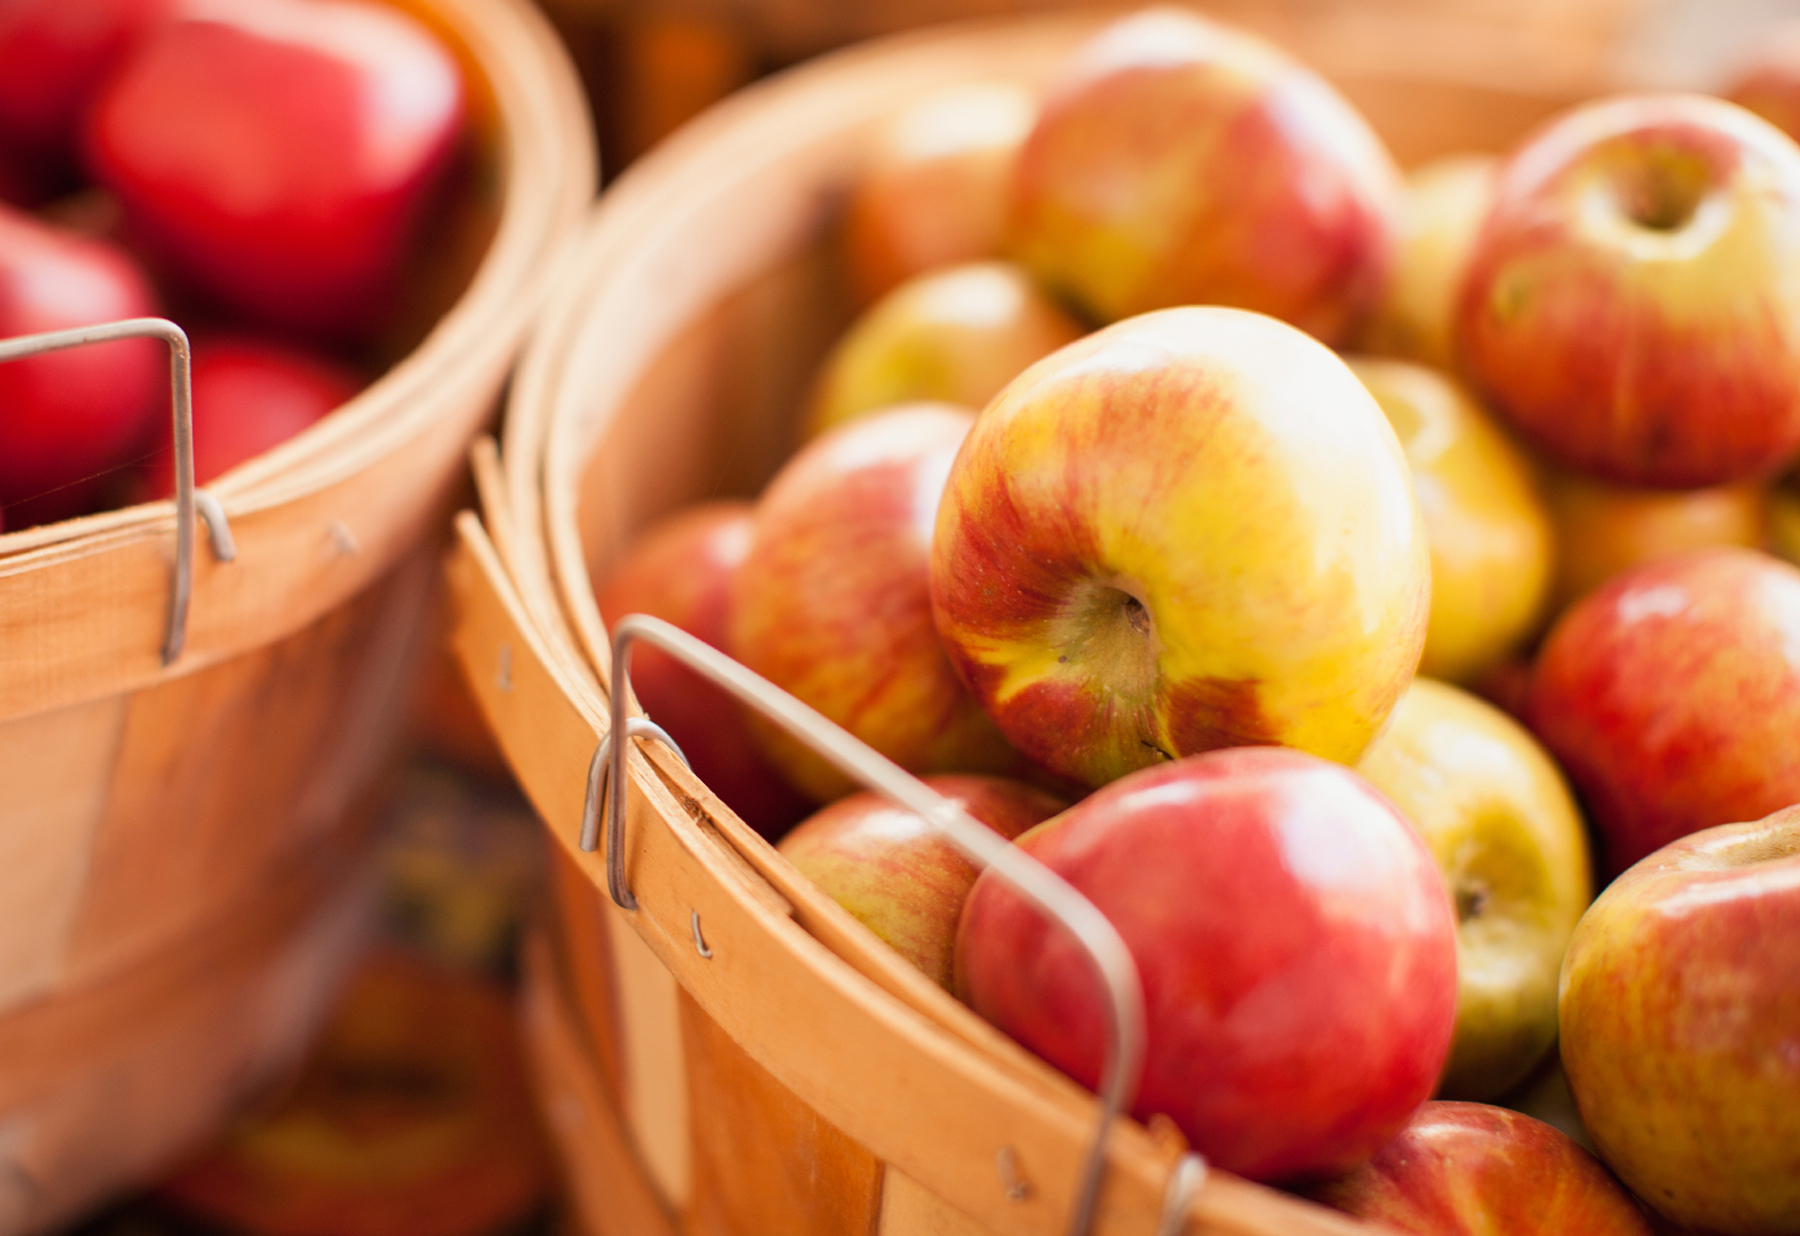 Best Healthy Foods for Fall | Greatist